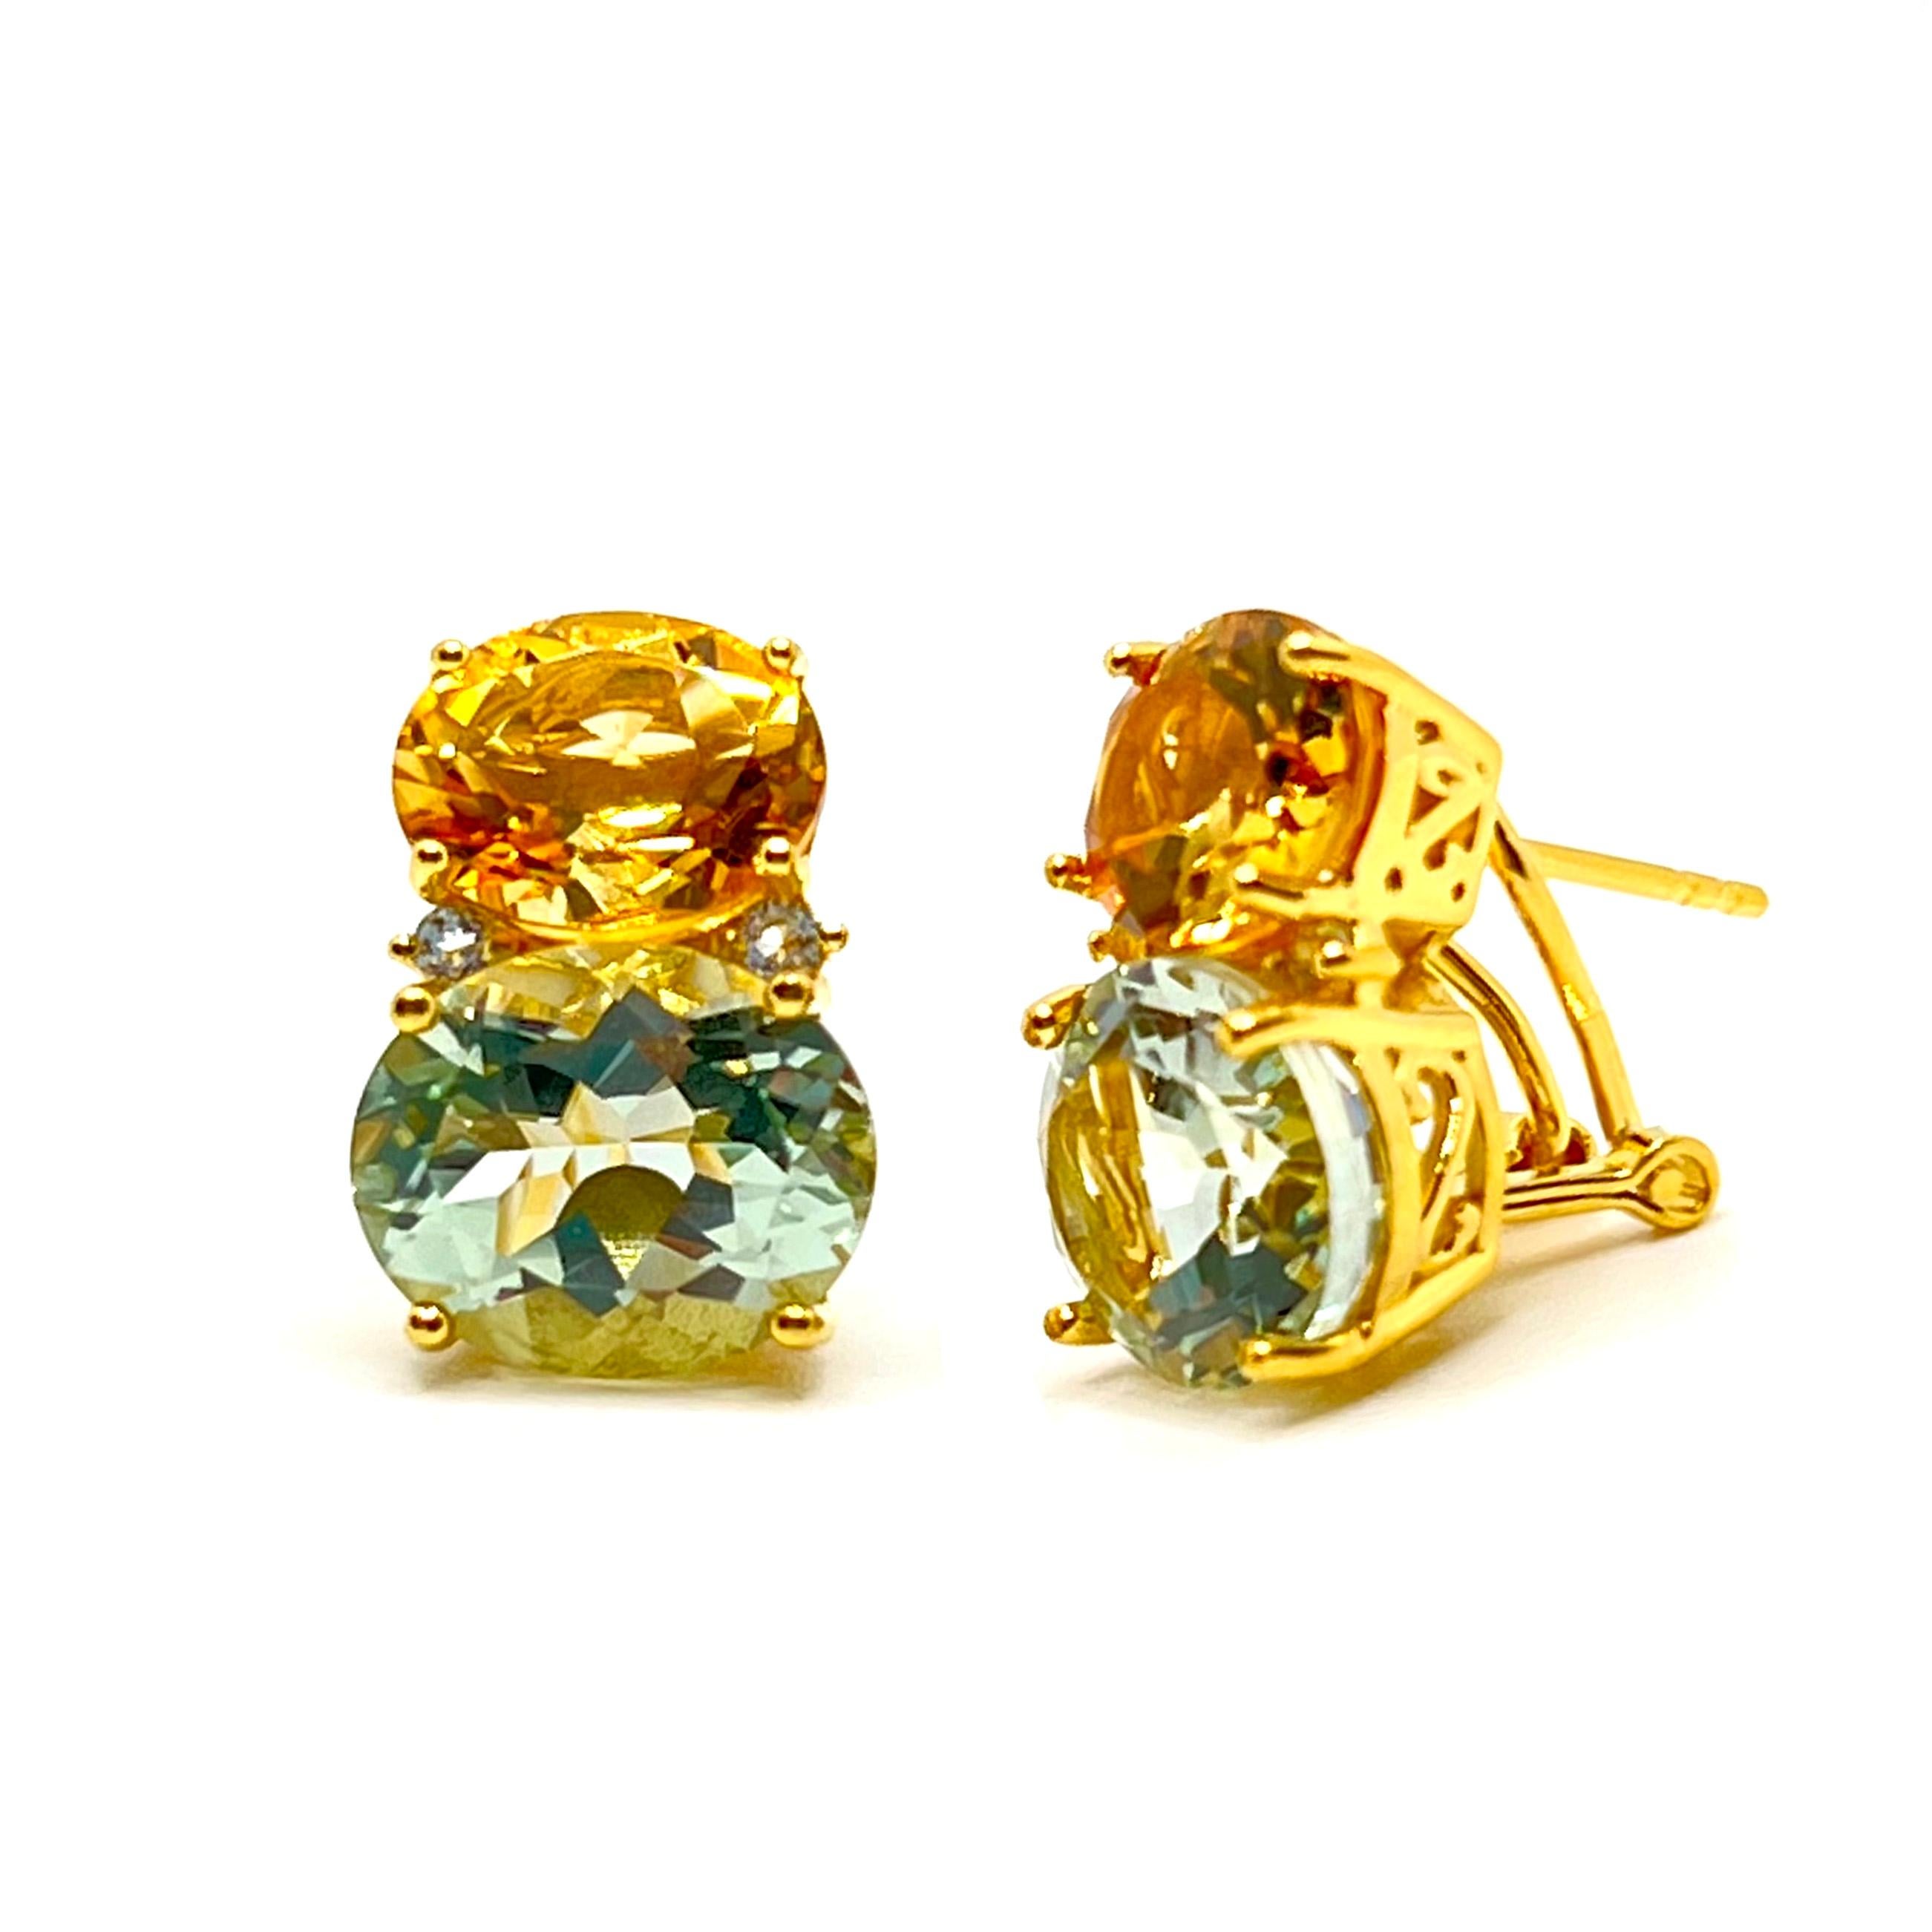 Contemporary Stunning Double Oval Citrine & Prasiolite Vermeil Earrings